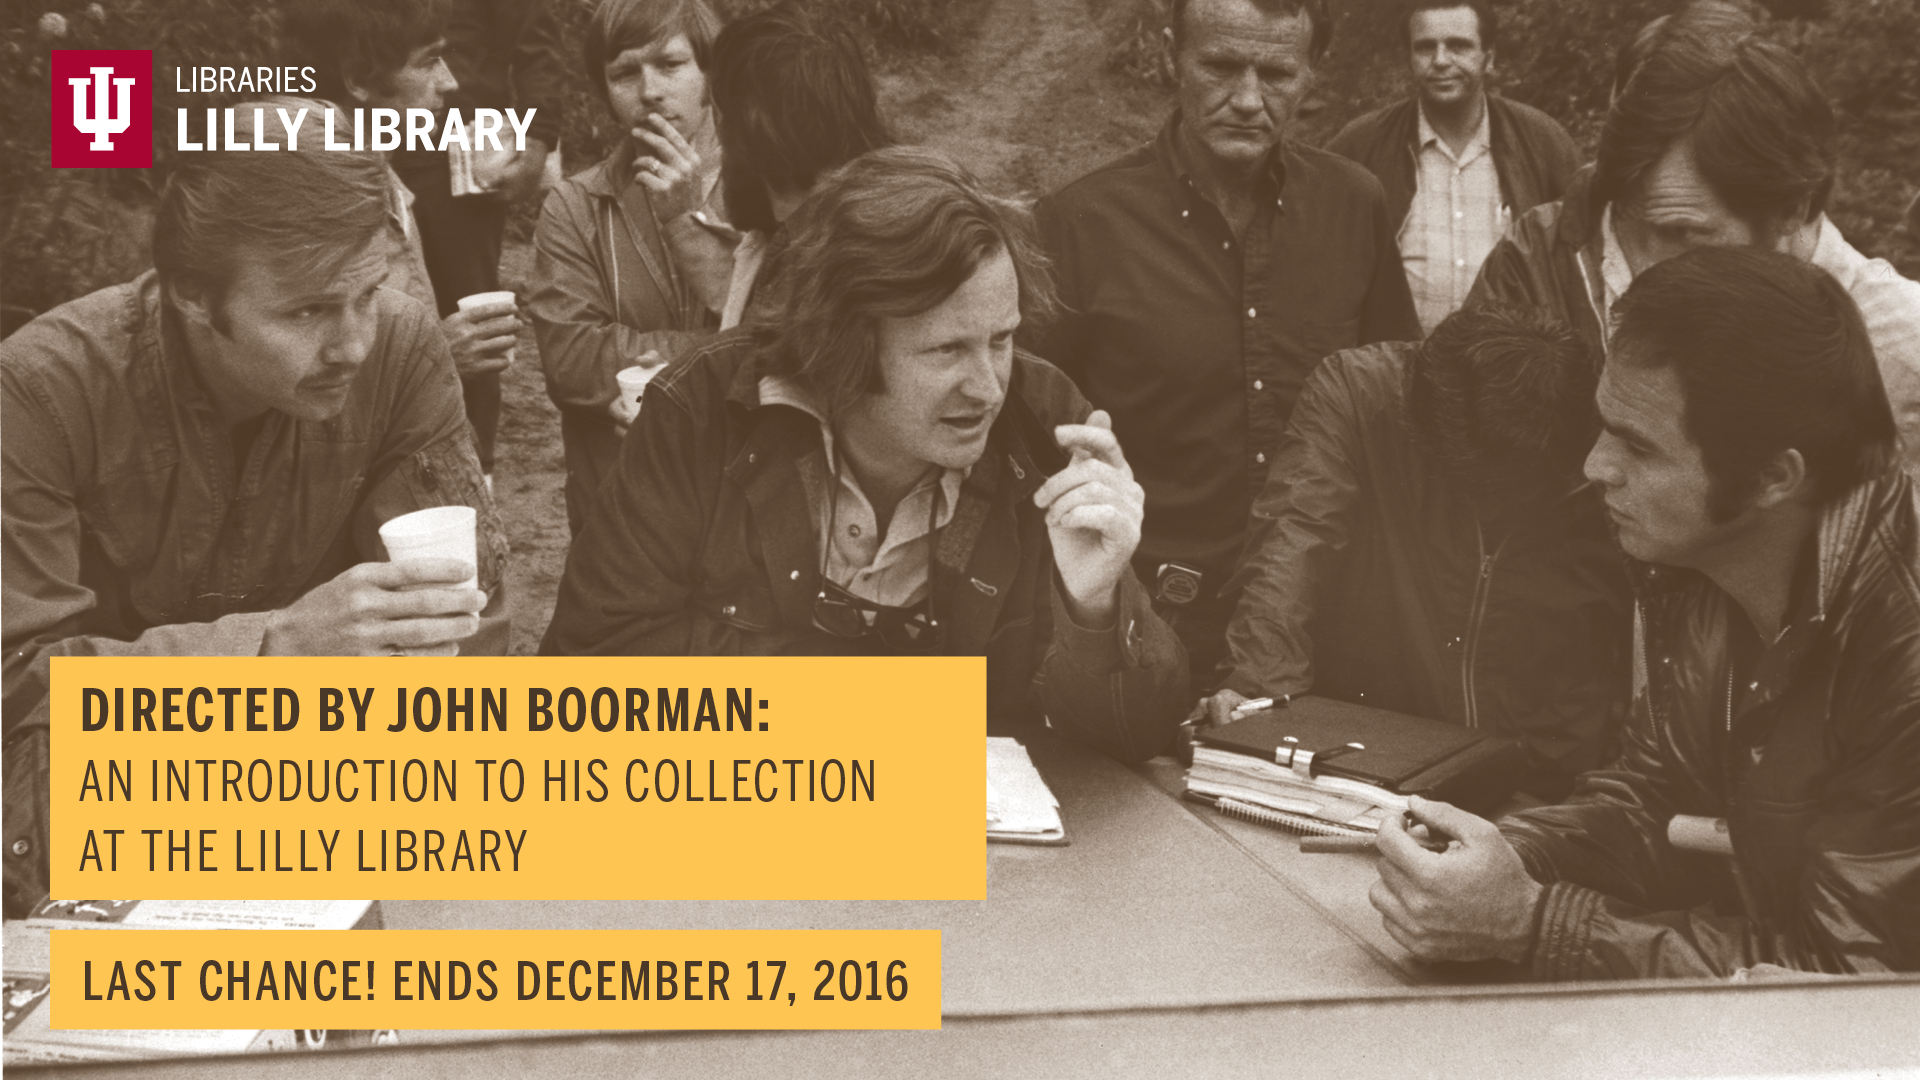 Directed by John Boorman: An Introduction to His Collection at the Lilly Library.